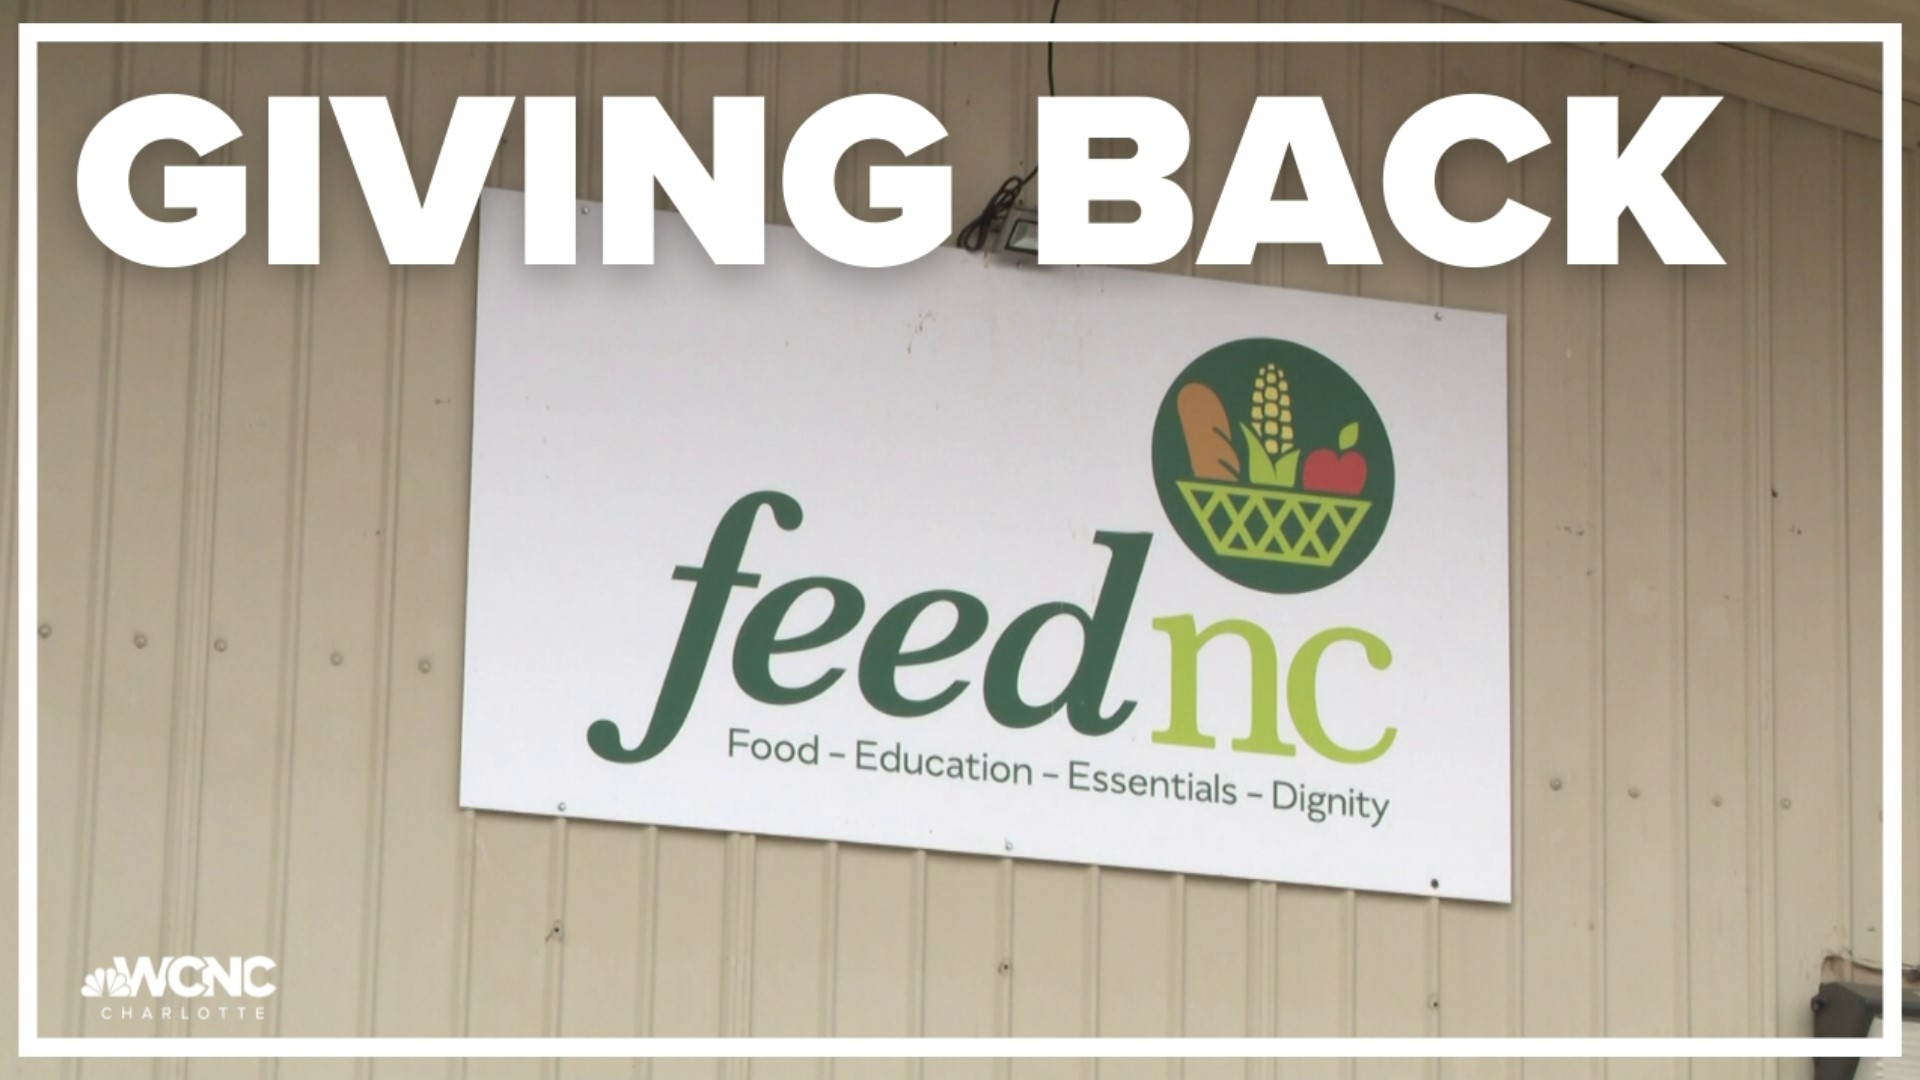 WCNC Charlotte highlights Feed NC, a Mooresville charity that serves more than a hundred people a day.